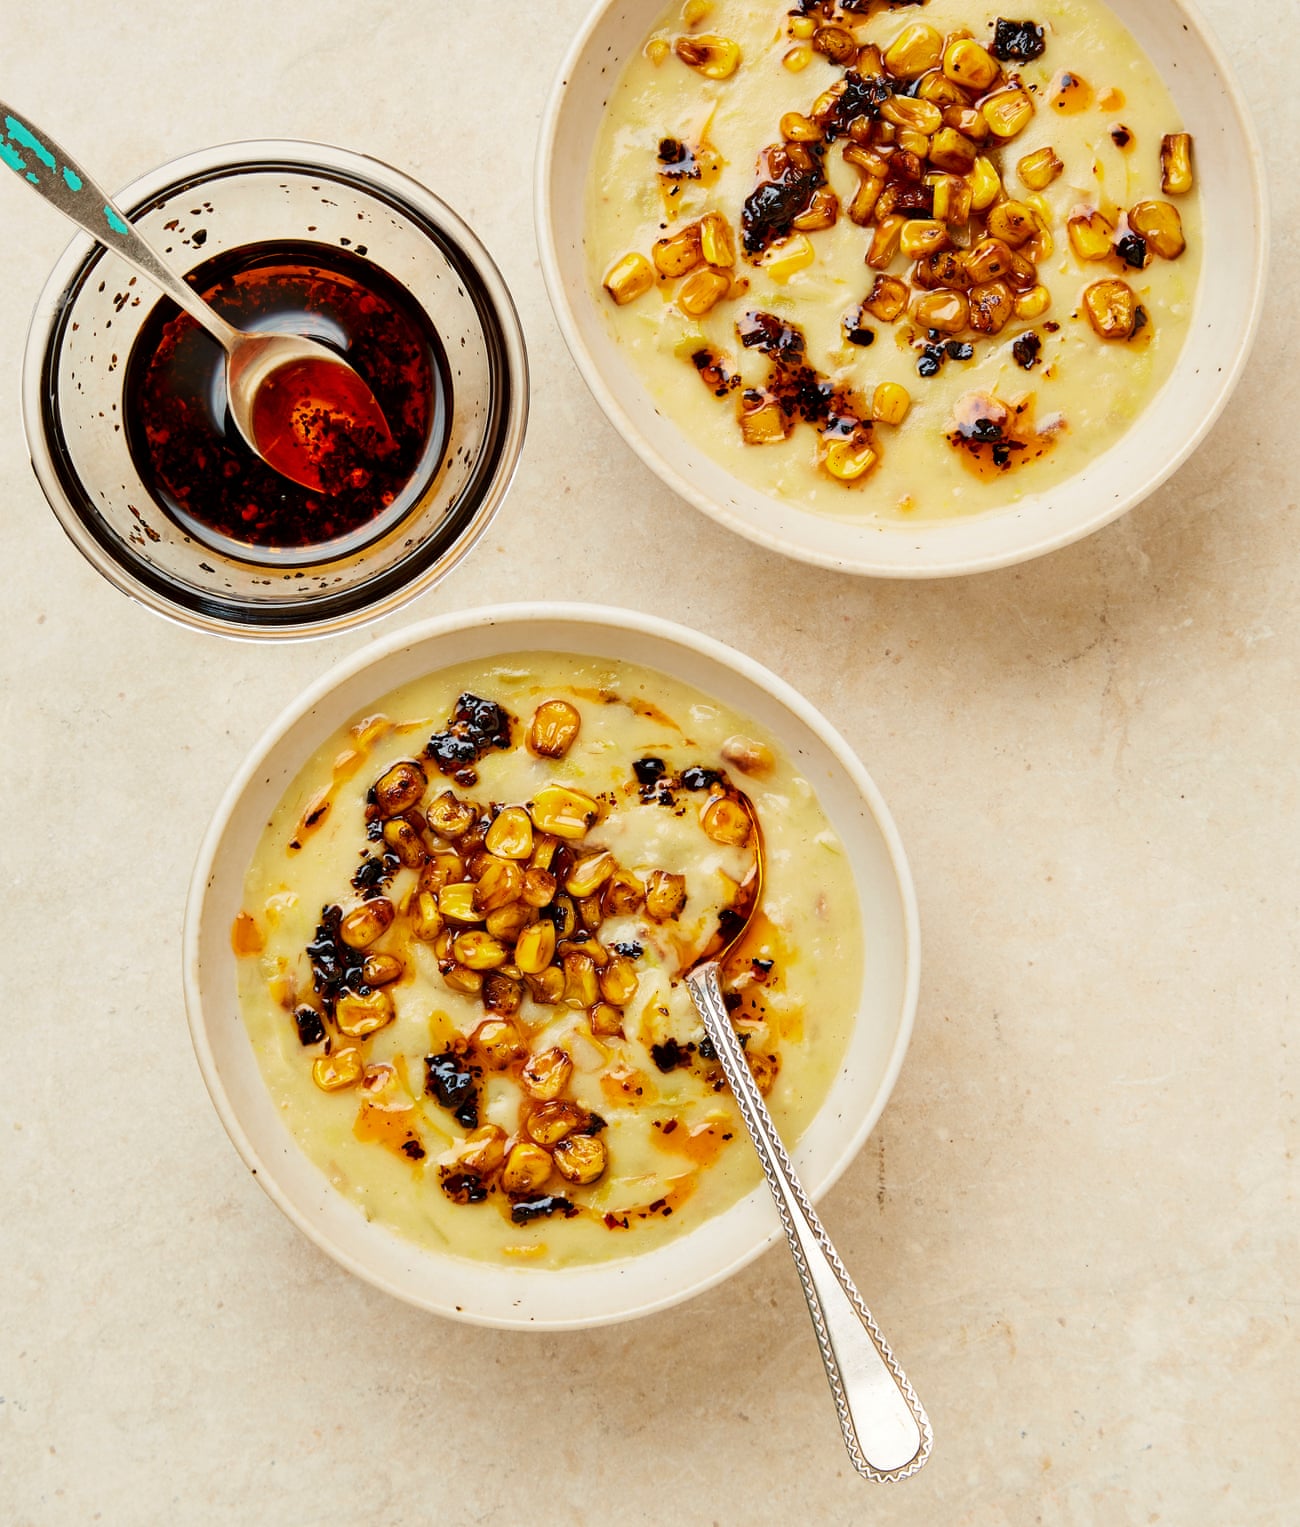 Meera Sodha's sweetcorn chowder with smoky chipotle oil.